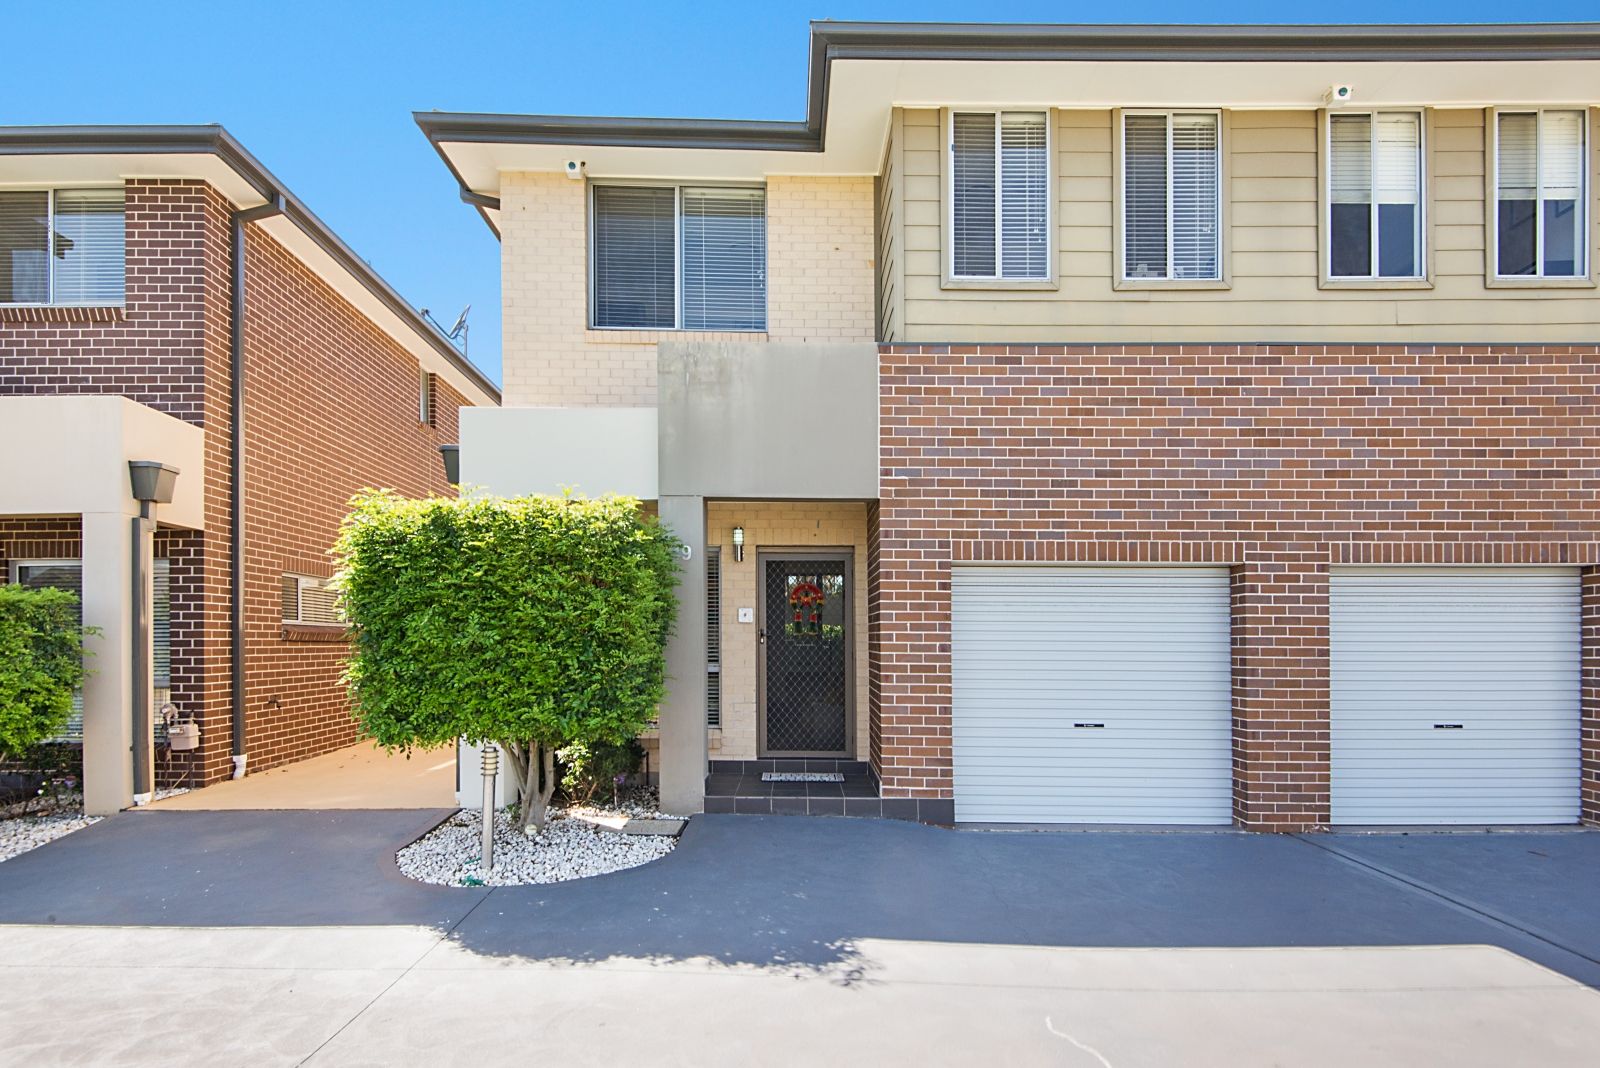 49/570 Sunnyholt Road, Stanhope Gardens NSW 2768, Image 0